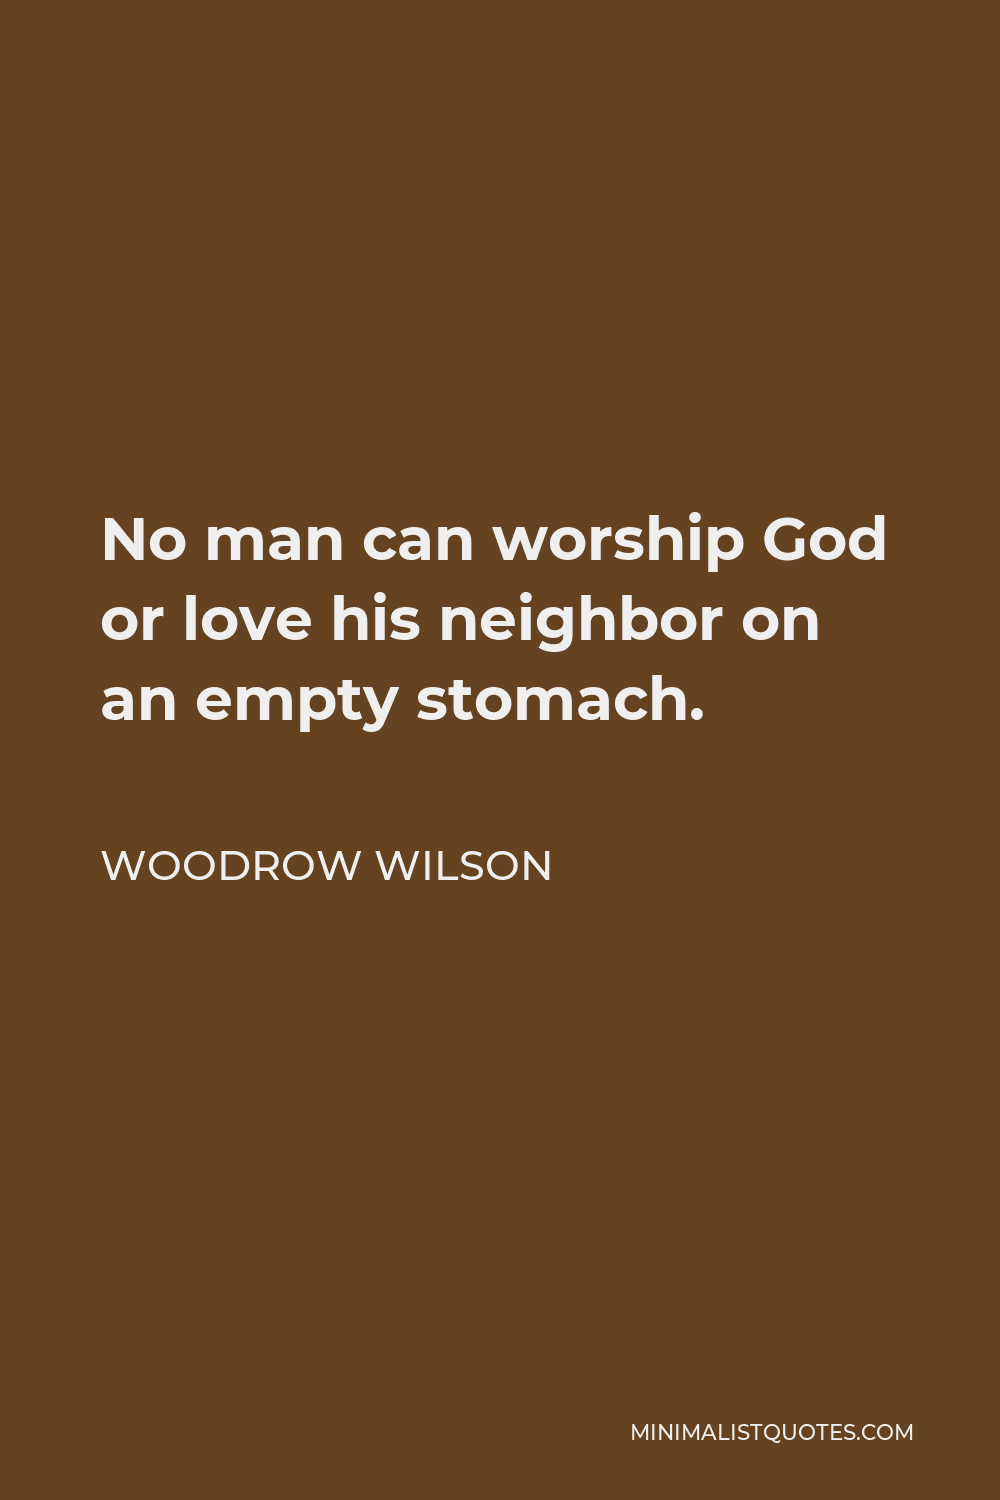 Woodrow Wilson Quote - No man can worship God or love his neighbor on an empty stomach.